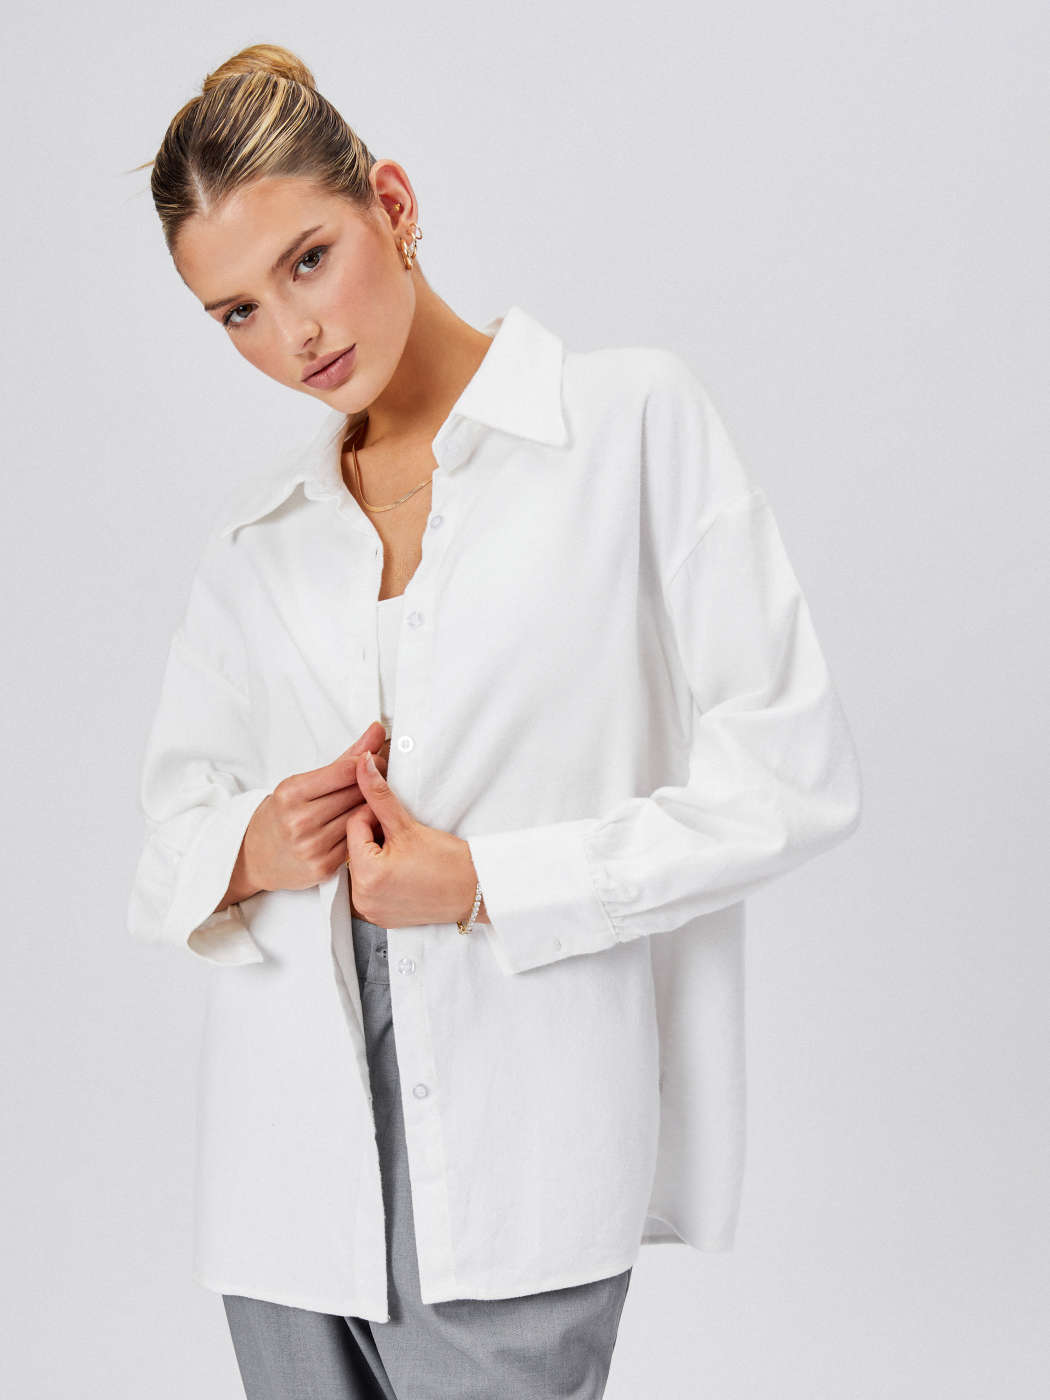 Unmanned cotton Staircase White Solid Oversized Shirt - Cider